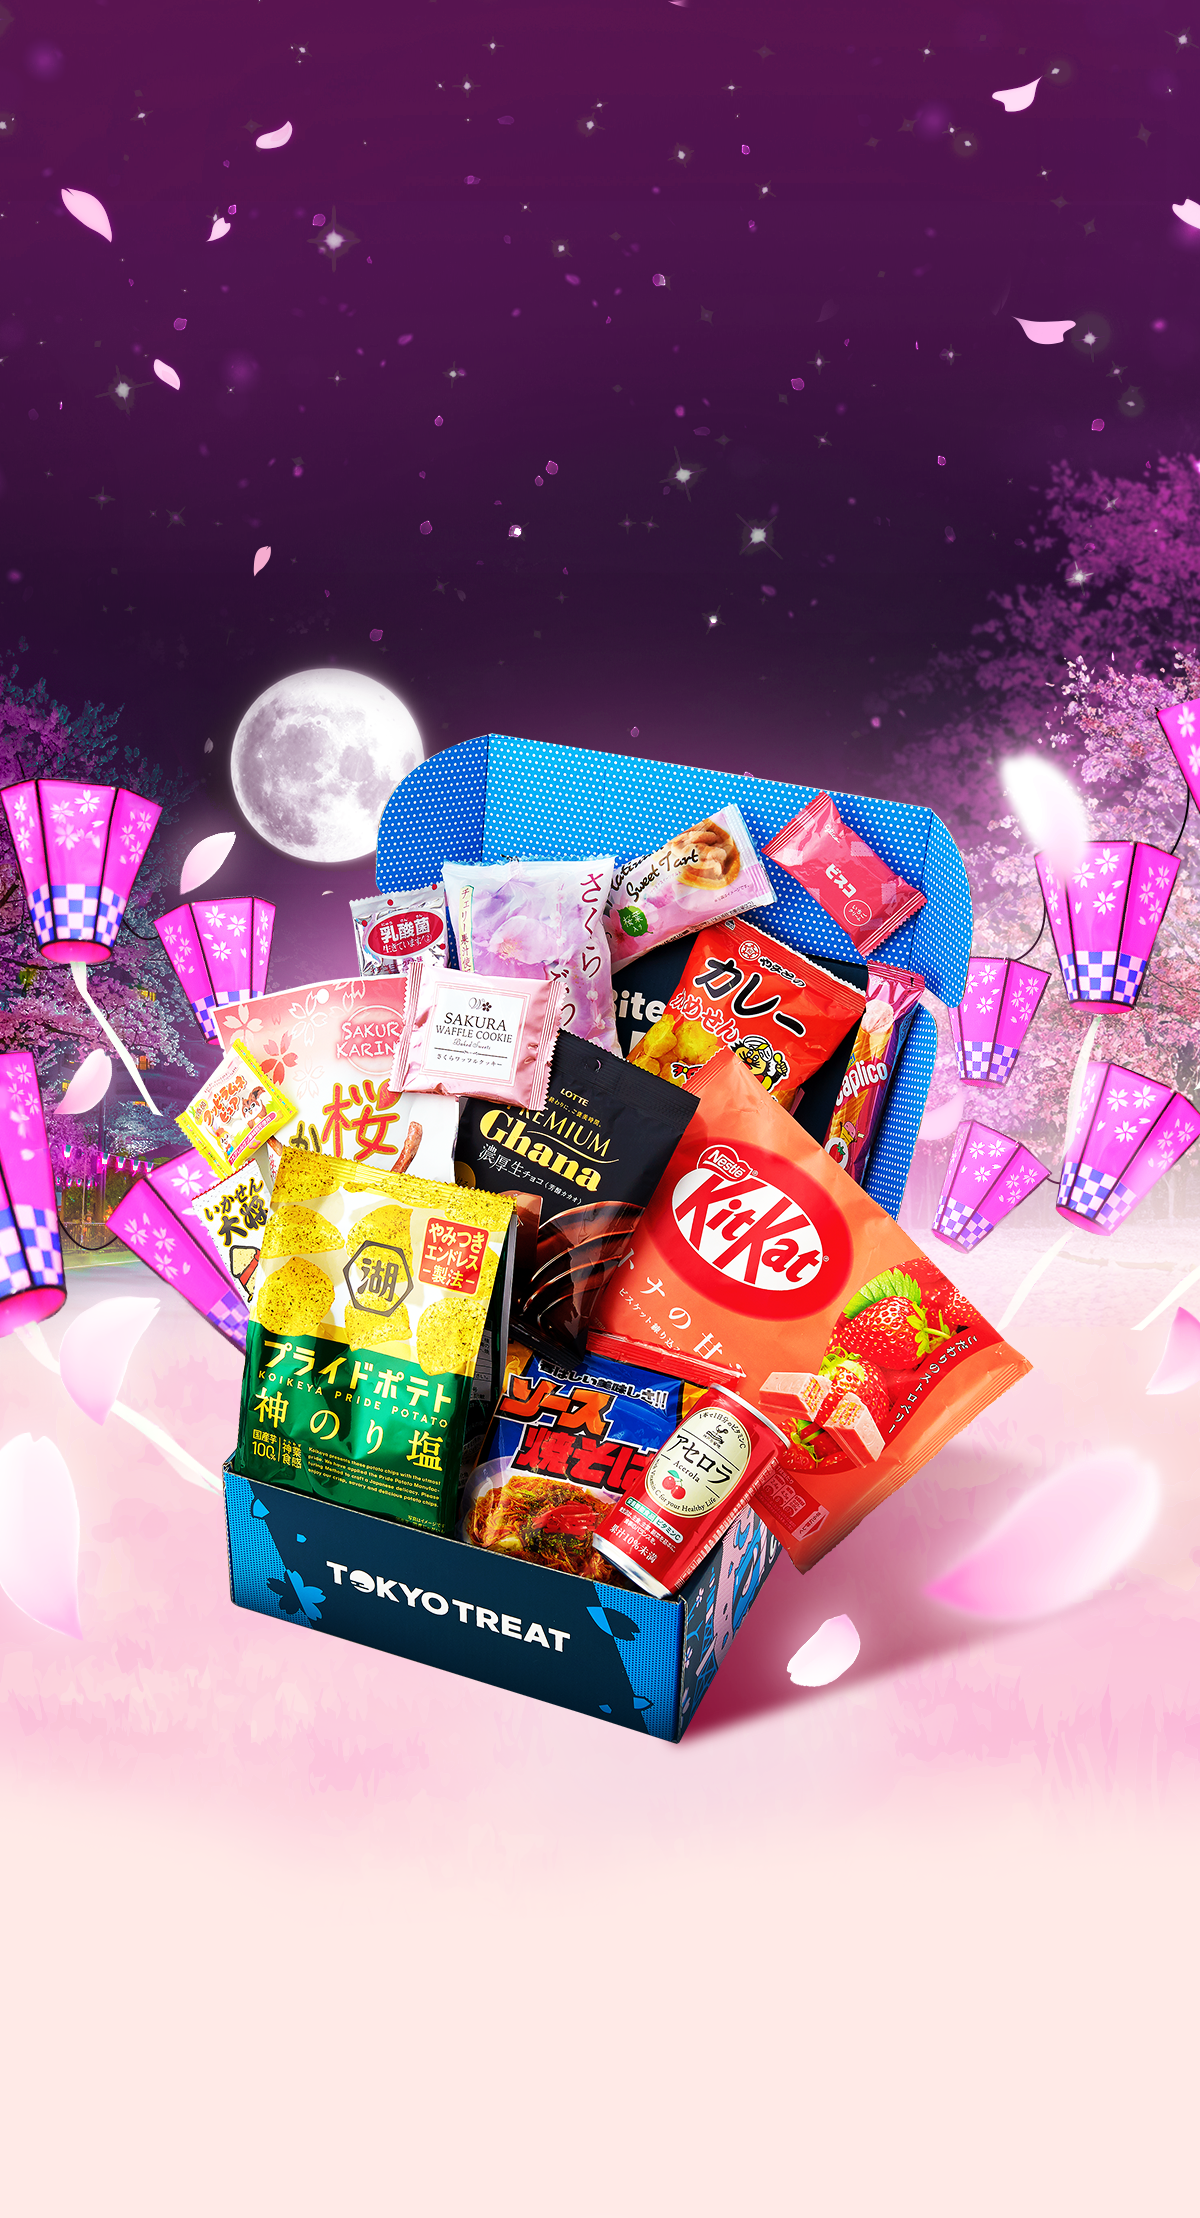 The TokyoTreat special-edition sakura season box sits against a background of pink cherry blossom trees.